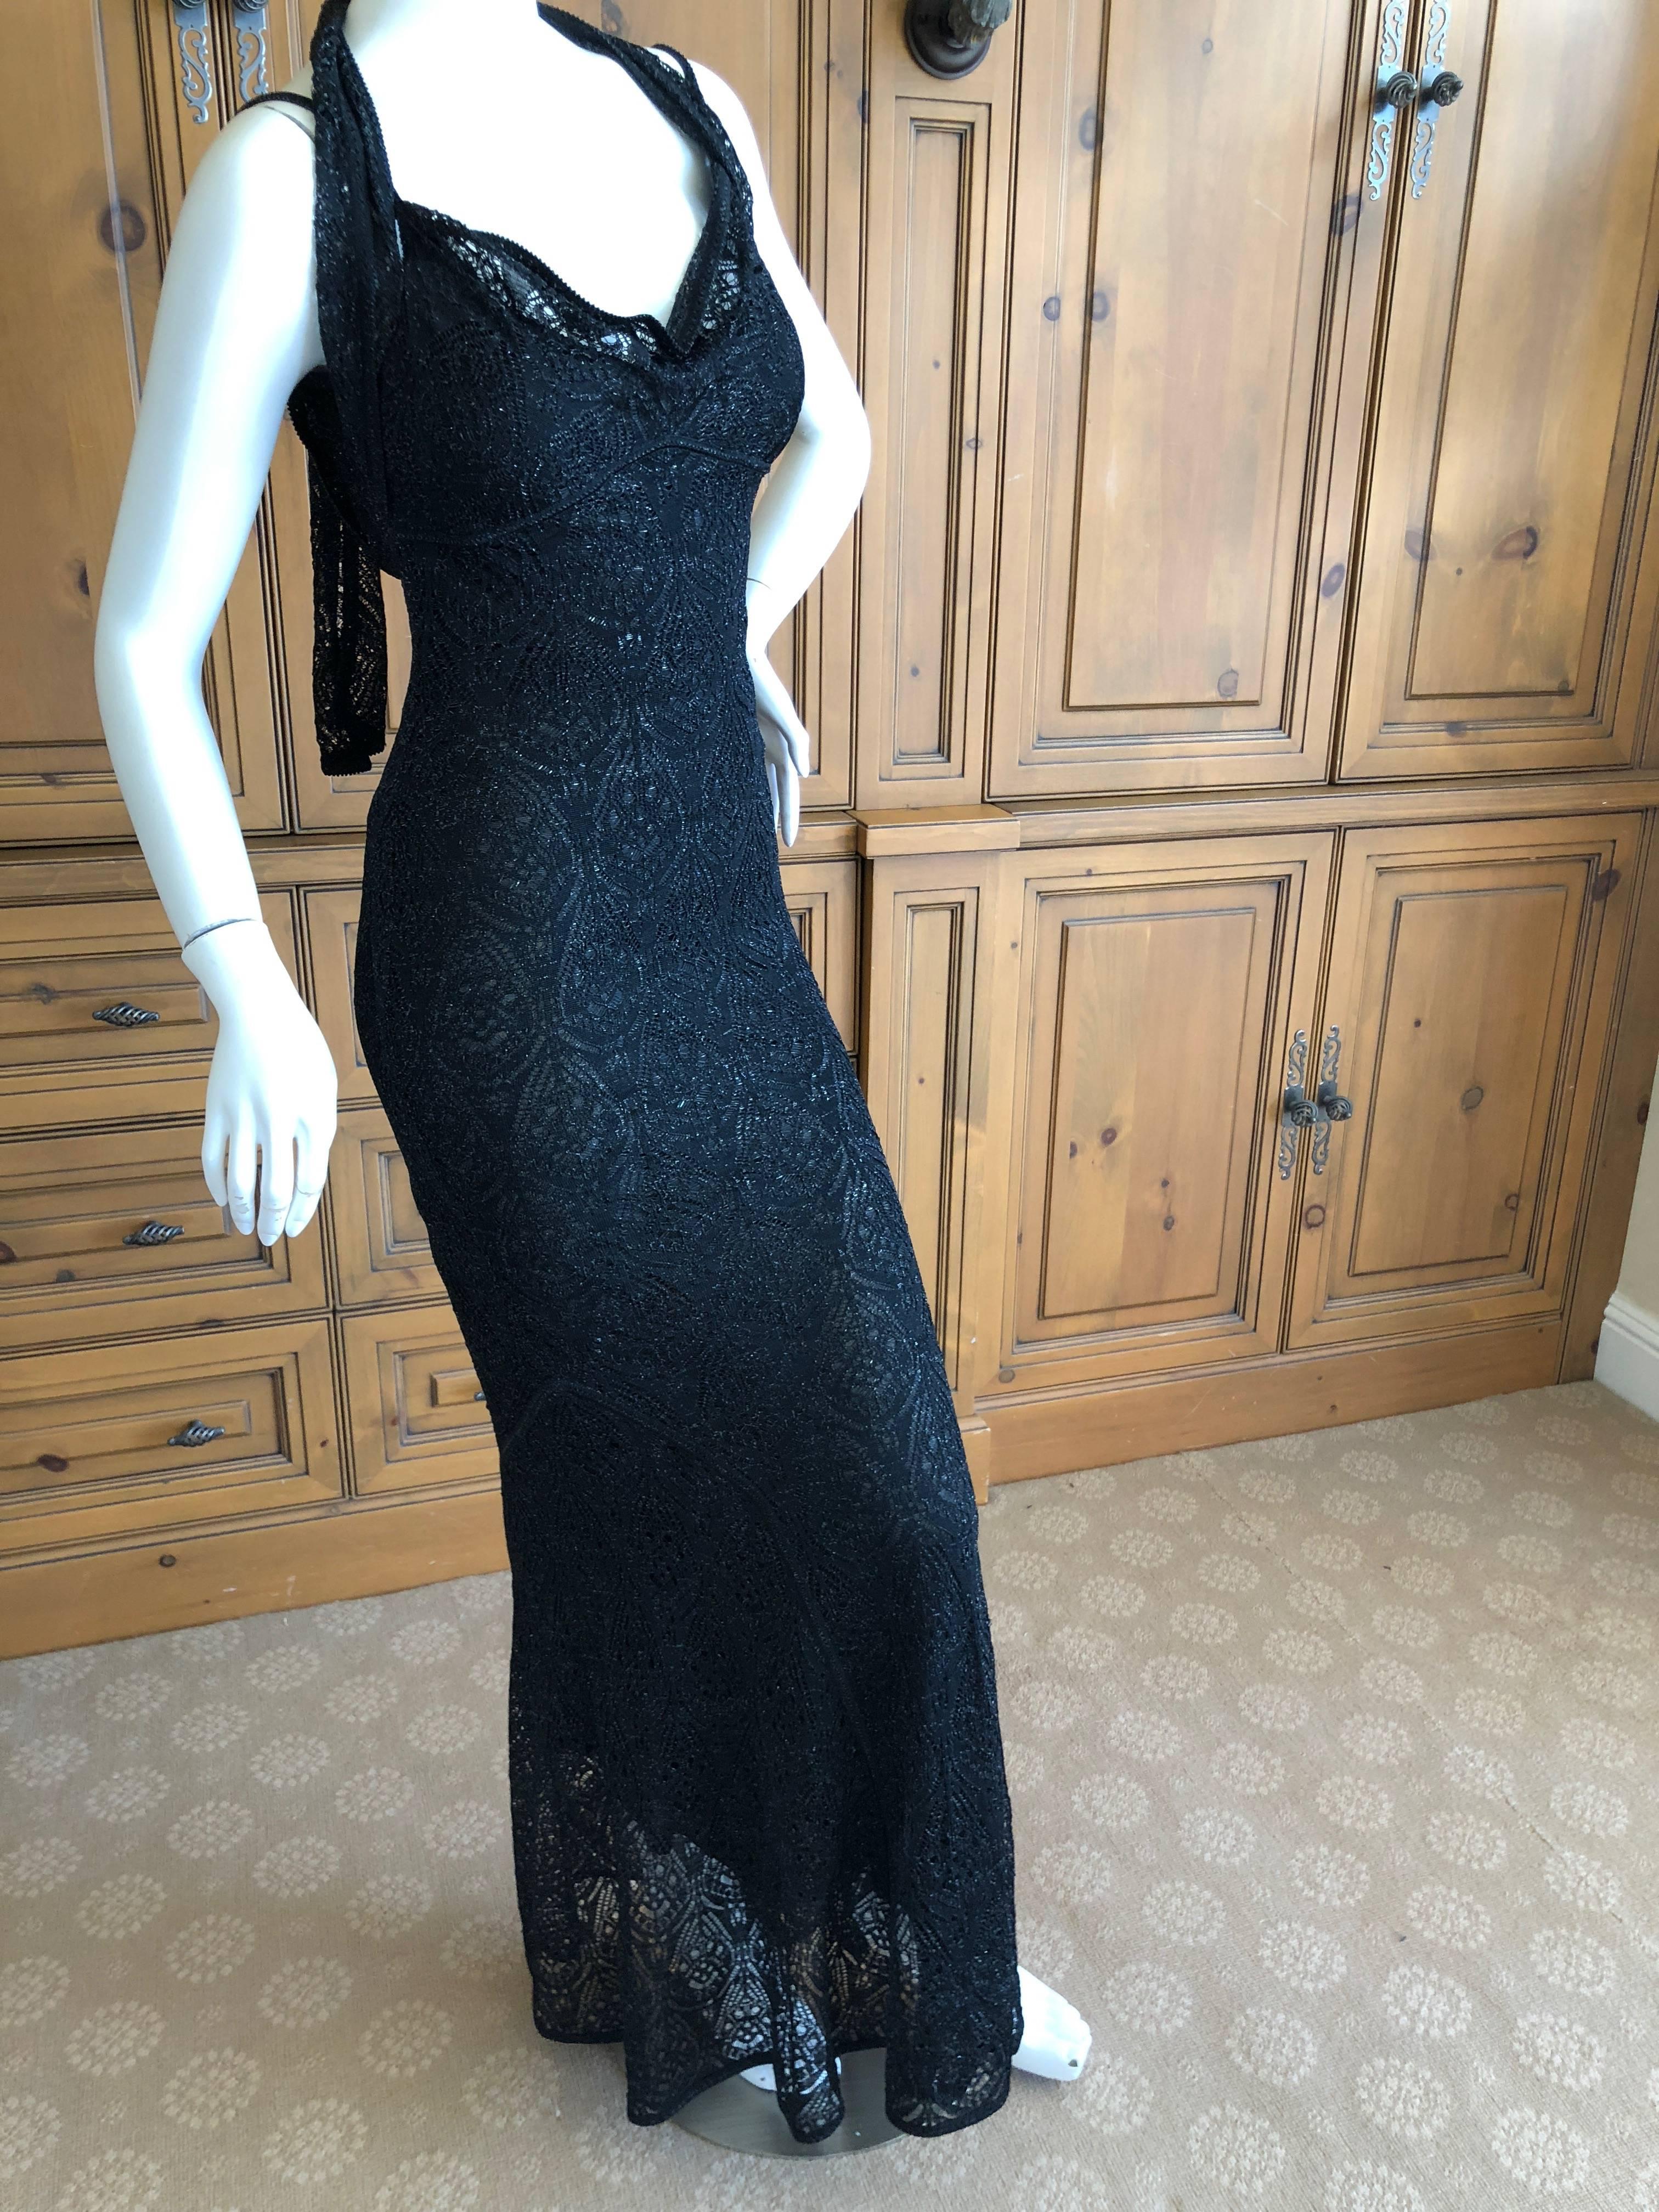 John Galliano Vintage AW 1999 Maori Knit Sheer Lace Dress Metallic Threads  In Excellent Condition For Sale In Cloverdale, CA